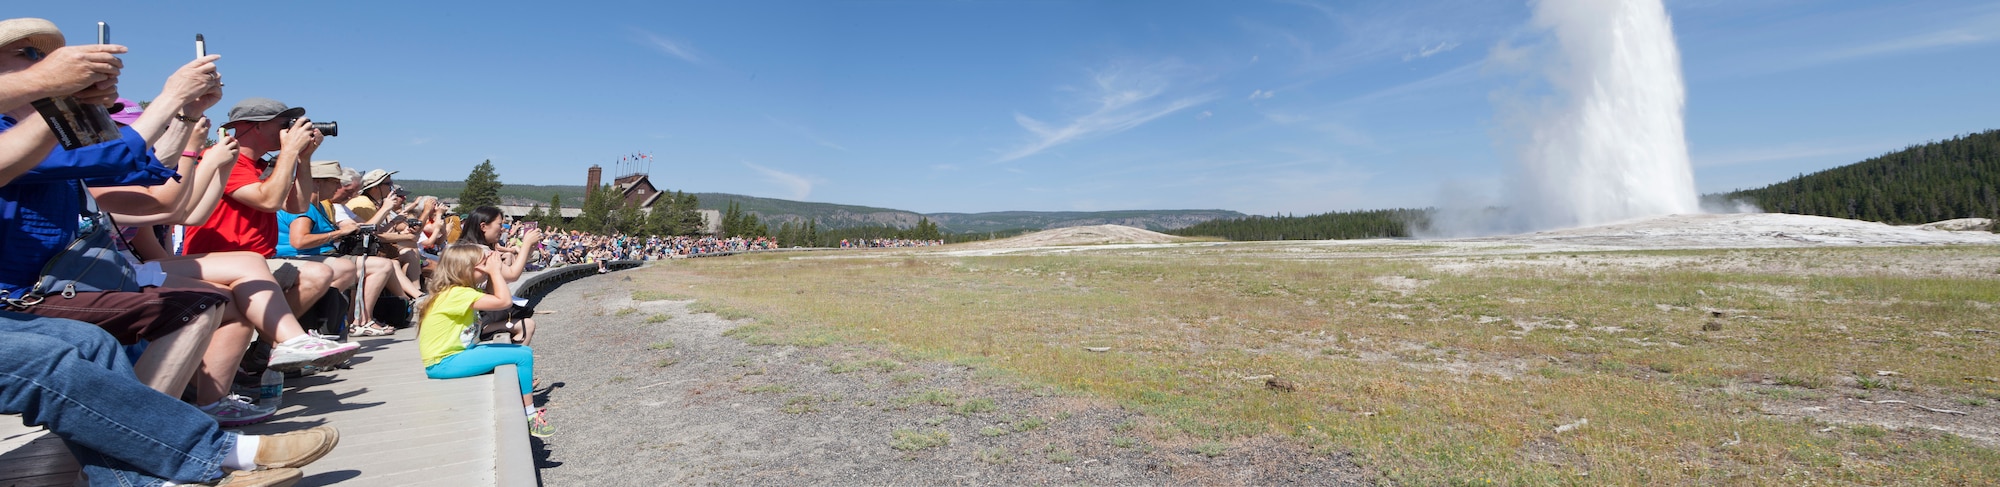 This photo panorama created from three separate images, depicts a crowd of spectators viewing the eruption of Old Faithful Geyser at Yellowstone National Park, Wyo., July 4, 2015. Airmen and civilians from F.E. Warren Air Force Base were on an Outdoor Recreation trip that explored the natural features of Yellowstone and Grand Teton National Park for the July 4th weekend. (U.S. Air Force photo illustration by Lan Kim)